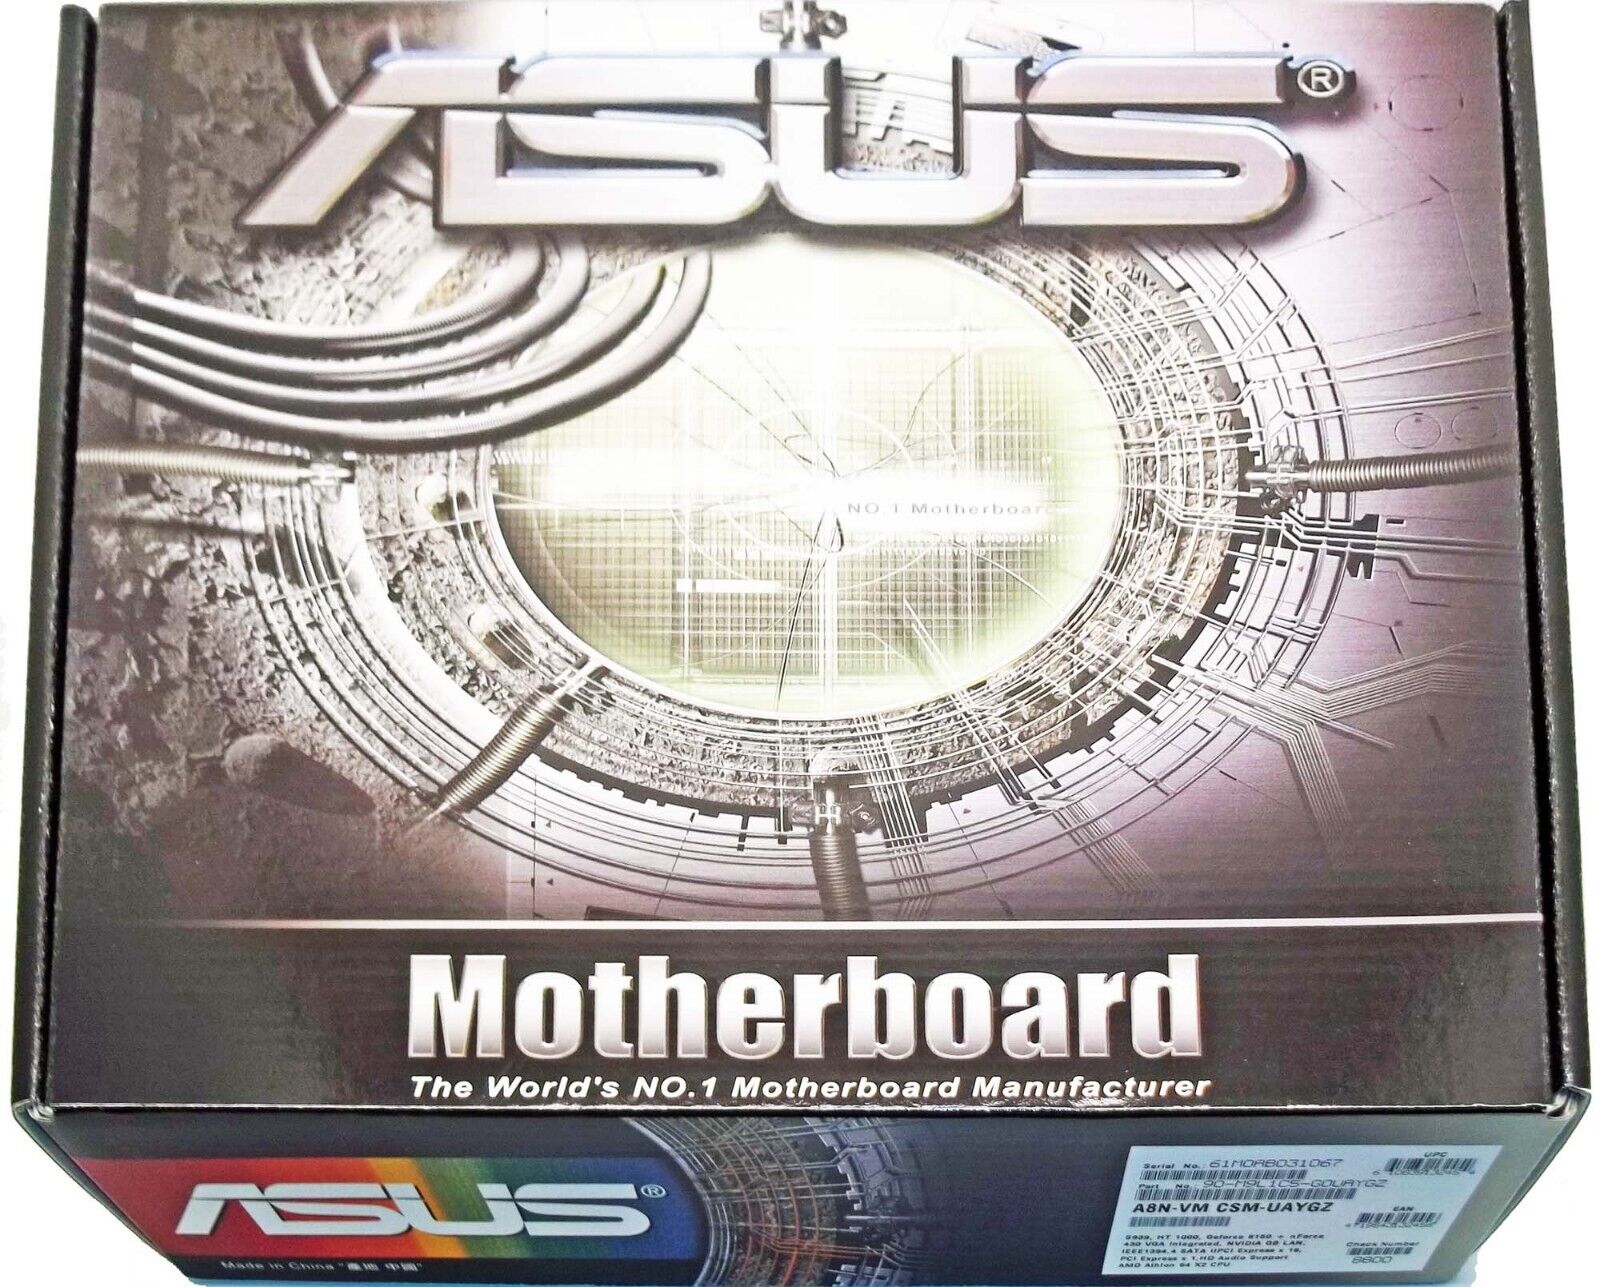 NEW ASUS MOTHERBOARD A8N-VM CSM W/ USER GUIDE, CD, ADAPTERS & AMD ATHLON 64 SLOT